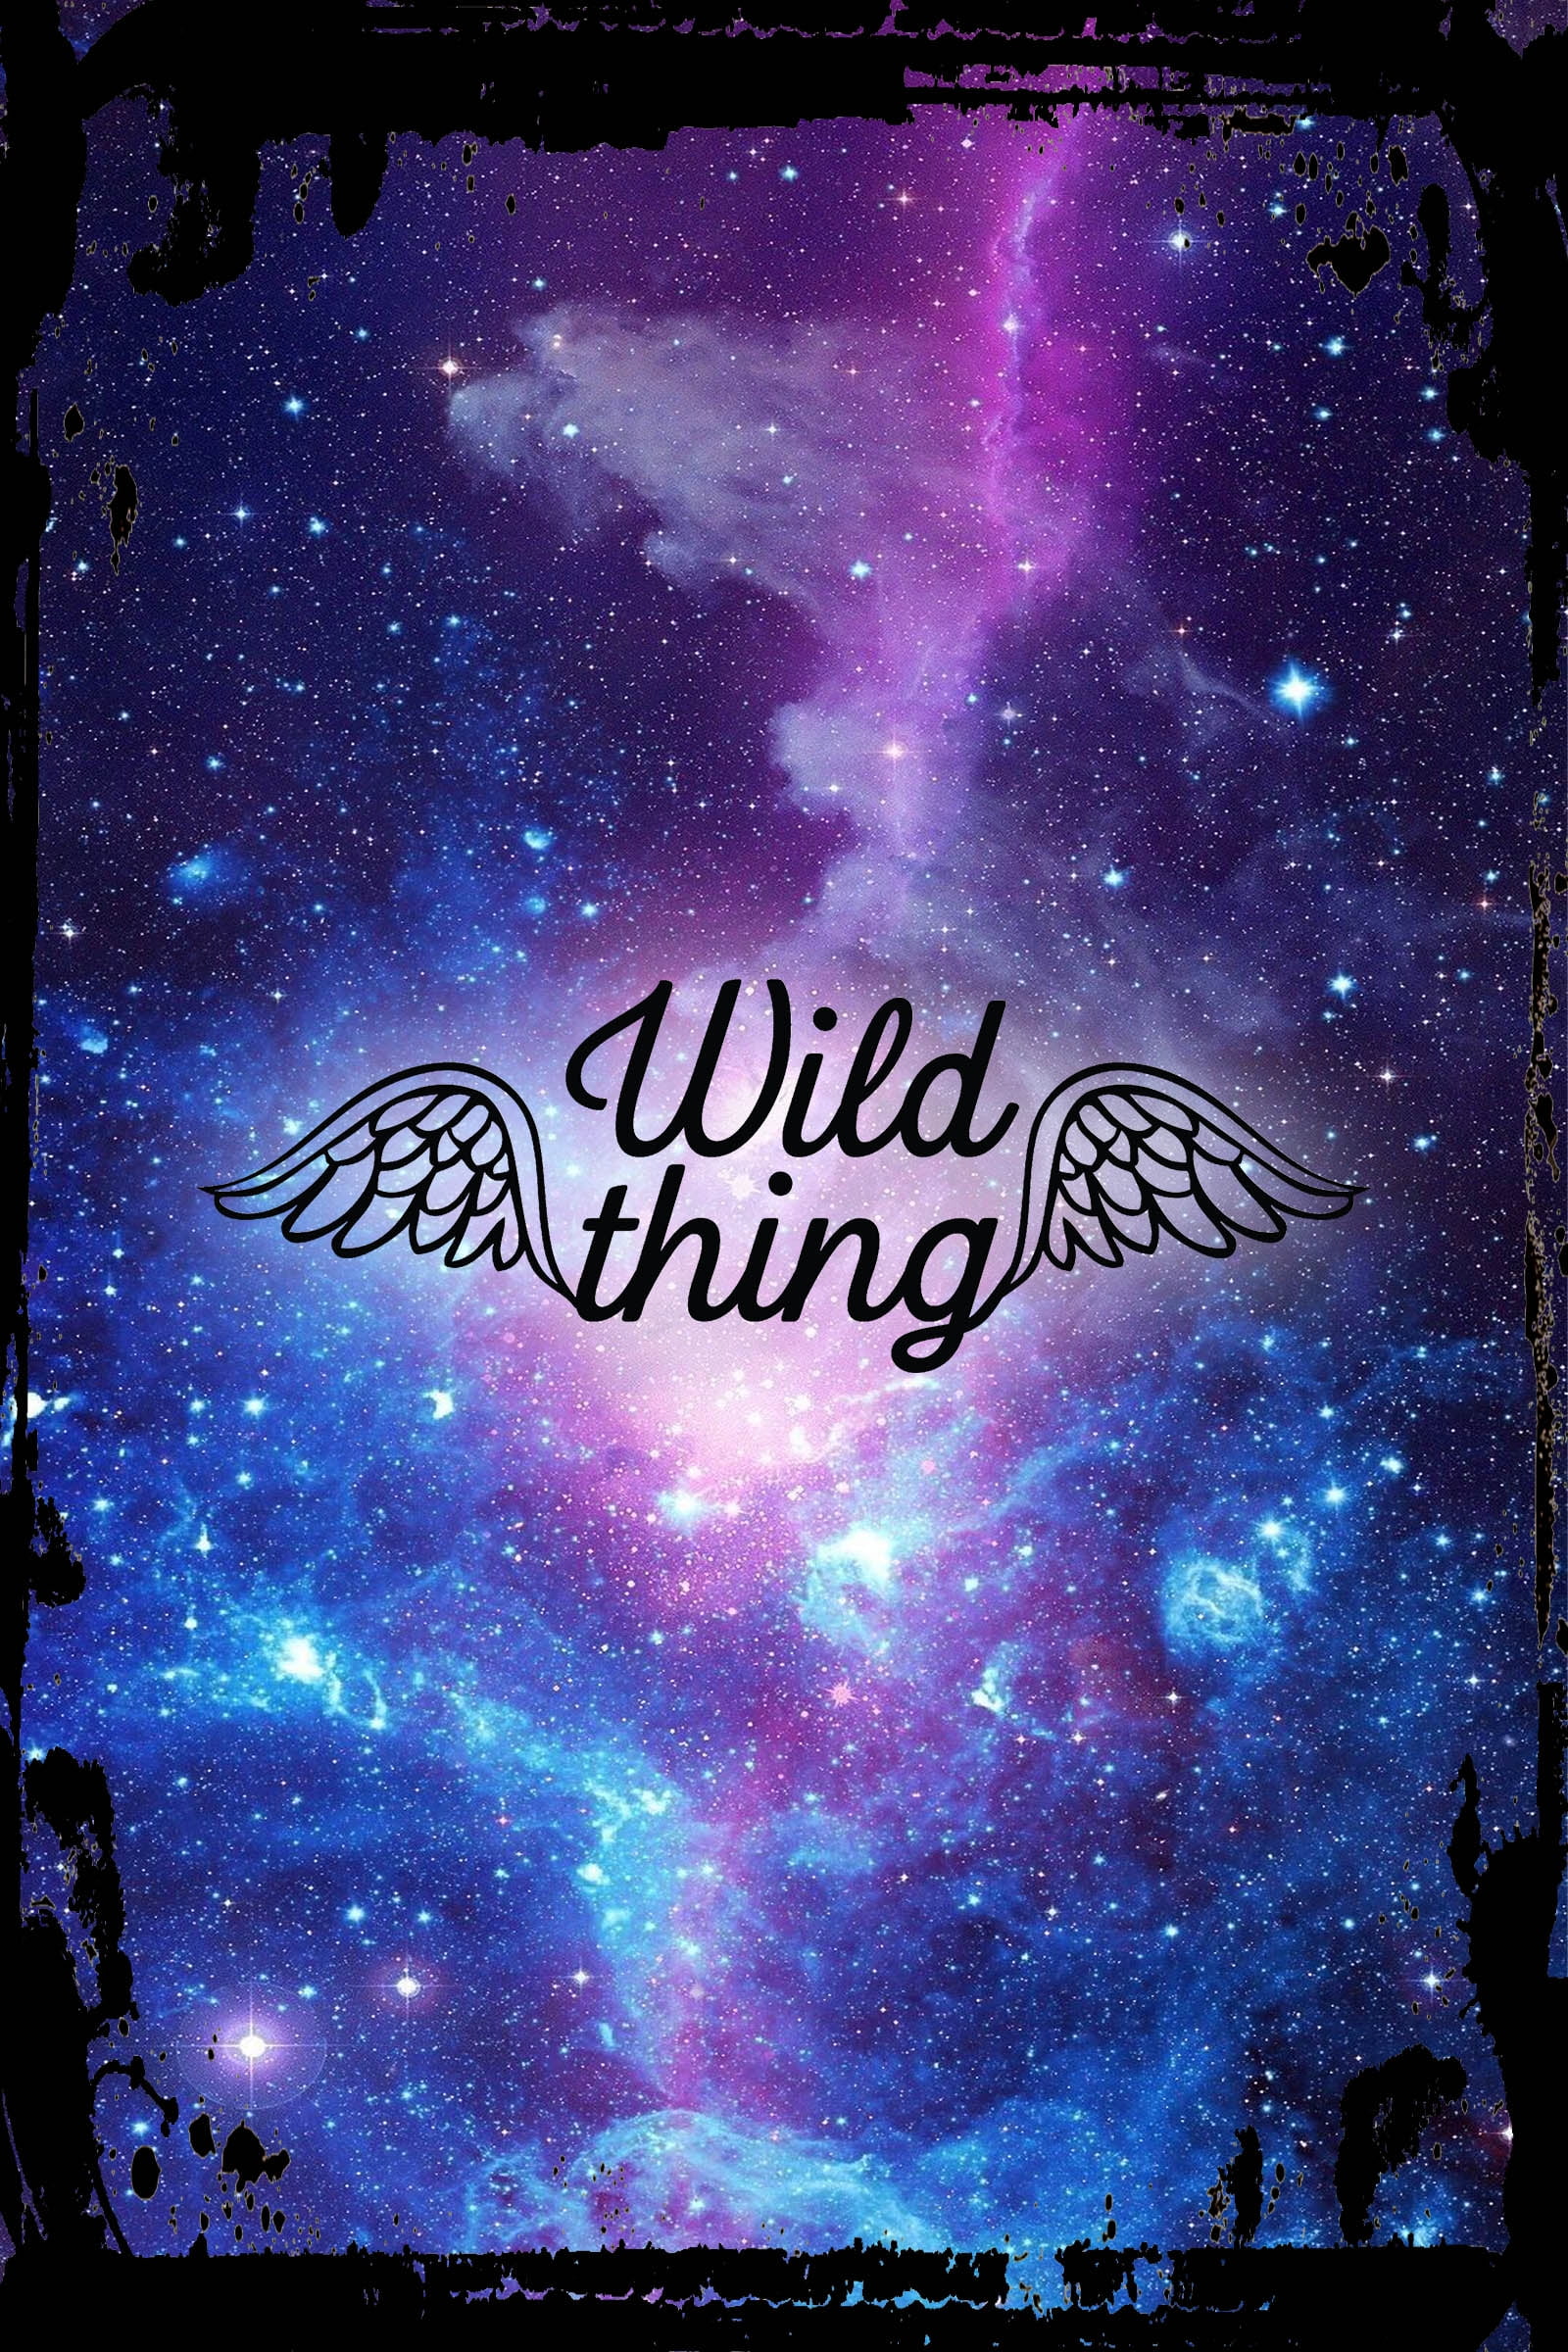 Galaxy Inspirational Wall Art Flat Canvas Wall Art Print Wild thing angel wings motorcycle rider bike Wall Sign Decor Funny Gift 12 x 16 inch - image 1 of 3